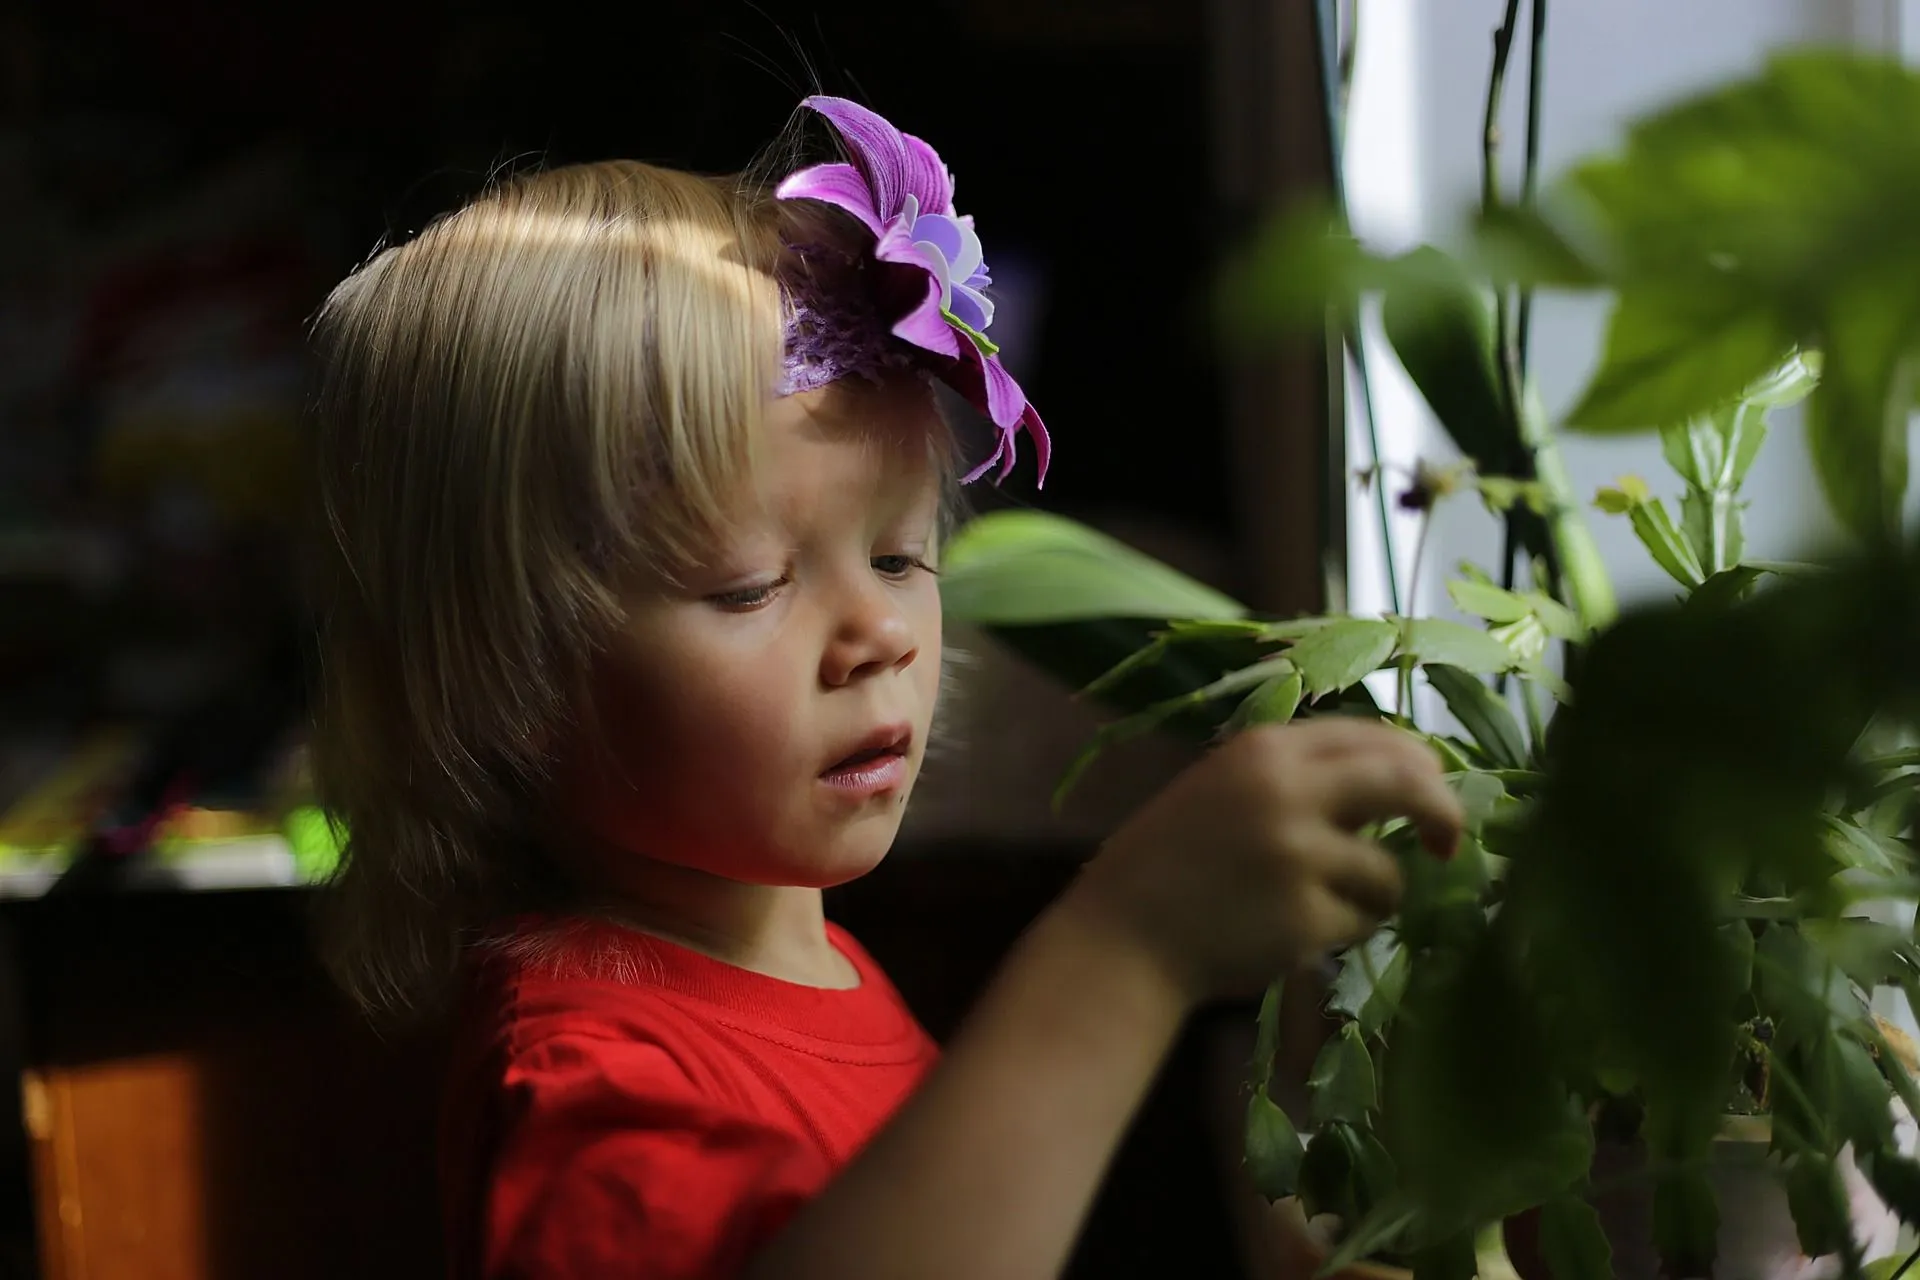 little boy with purple flower in his hair looking at plants